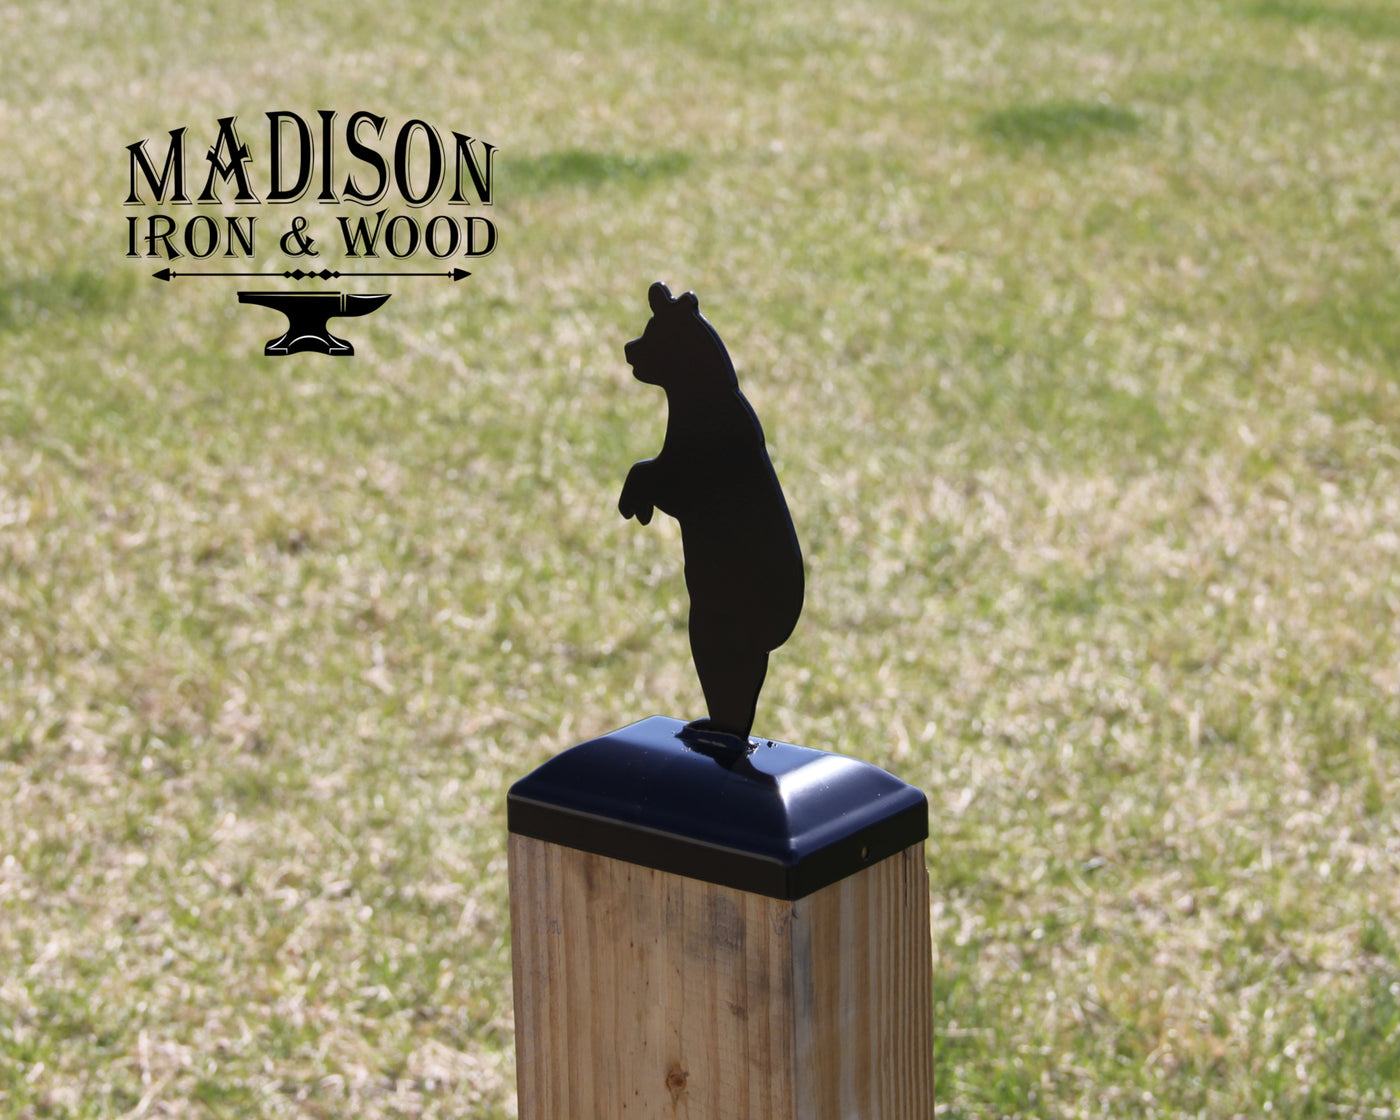 4x6 Standing Bear Post Cap - Madison Iron and Wood - Post Cap - metal outdoor decor - Steel deocrations - american made products - veteran owned business products - fencing decorations - fencing supplies - custom wall decorations - personalized wall signs - steel - decorative post caps - steel post caps - metal post caps - brackets - structural brackets - home improvement - easter - easter decorations - easter gift - easter yard decor